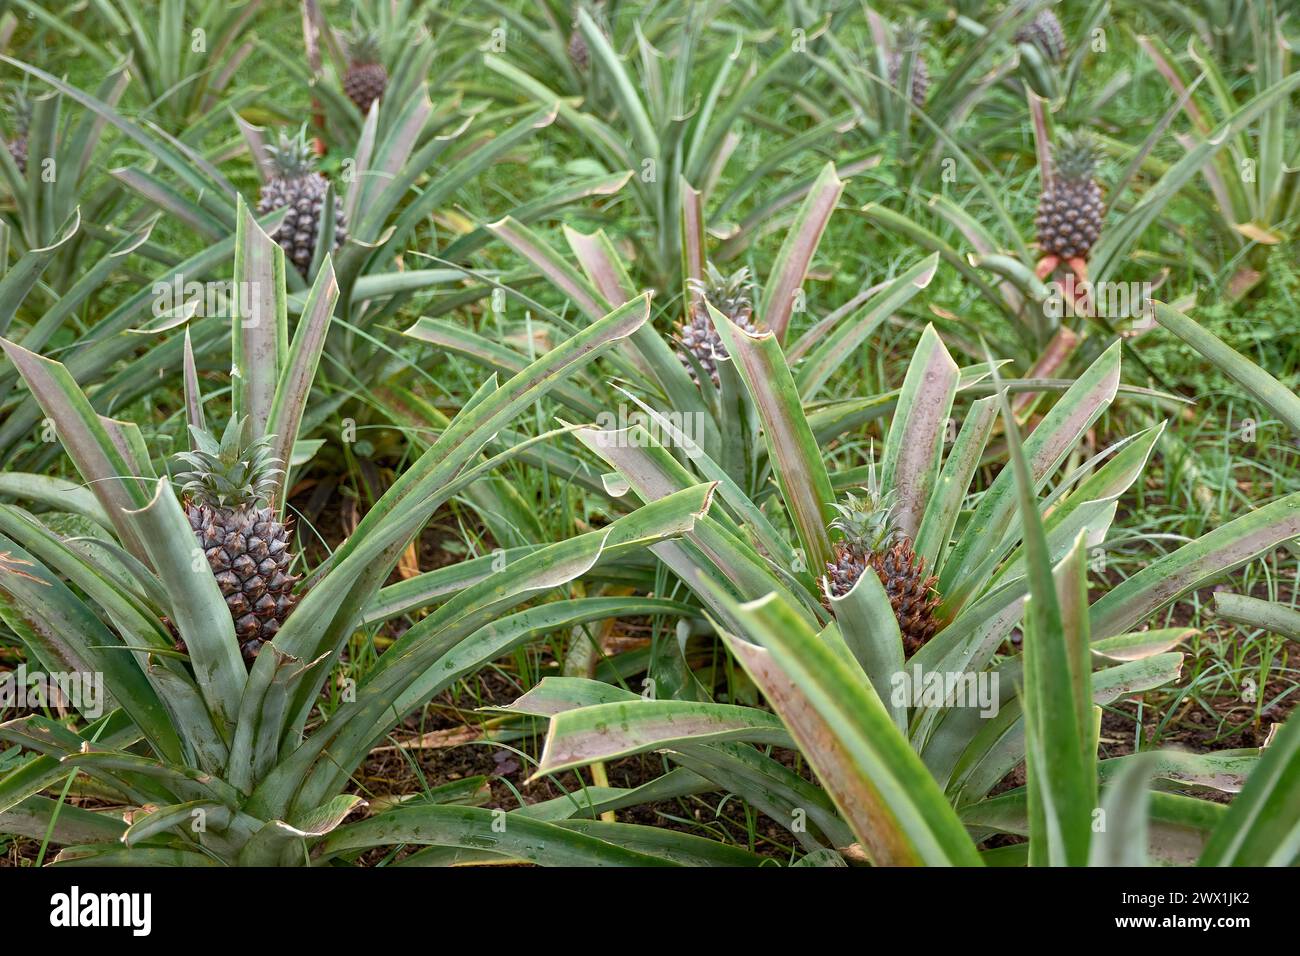 'Ananas' plantation in Azores, tropical pineapples typical of the Azores Islands with a much sweeter flavor Stock Photo